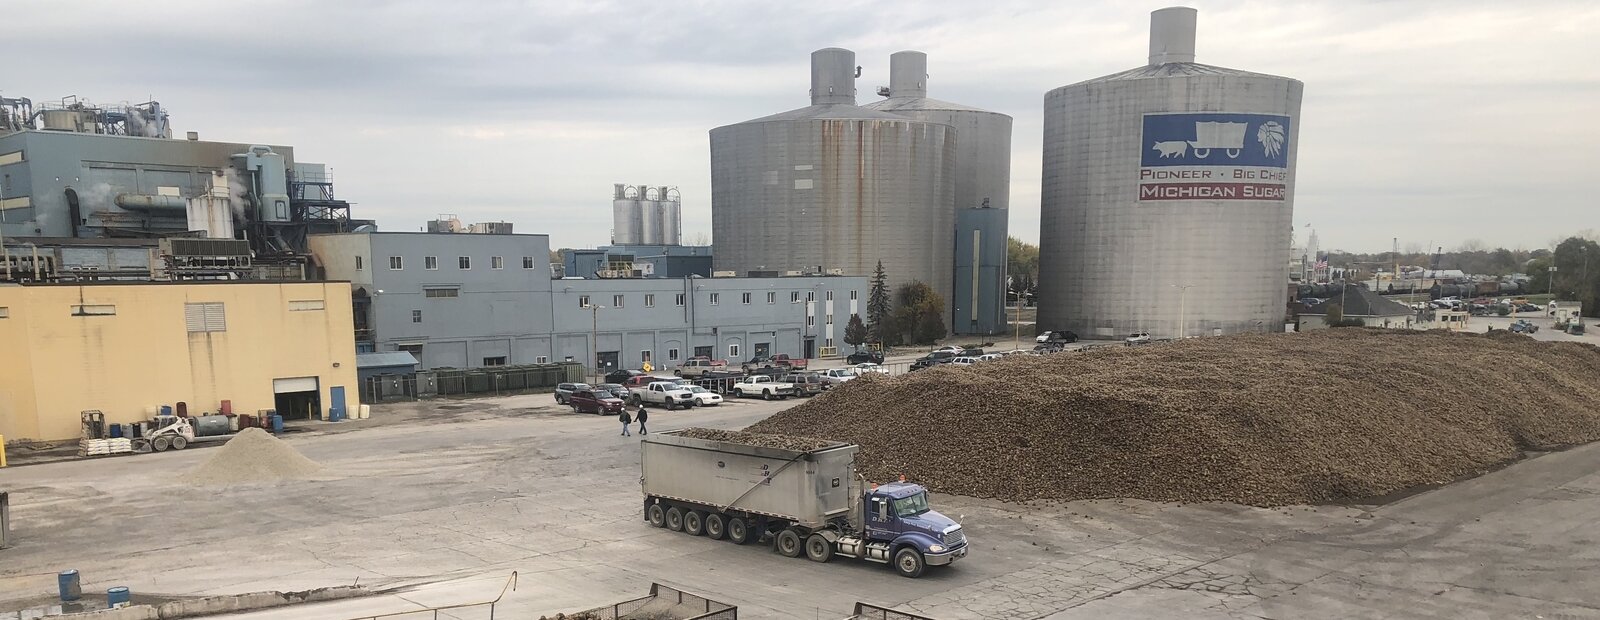 Michigan Sugar turns millions of tons of beets into sugar every year.